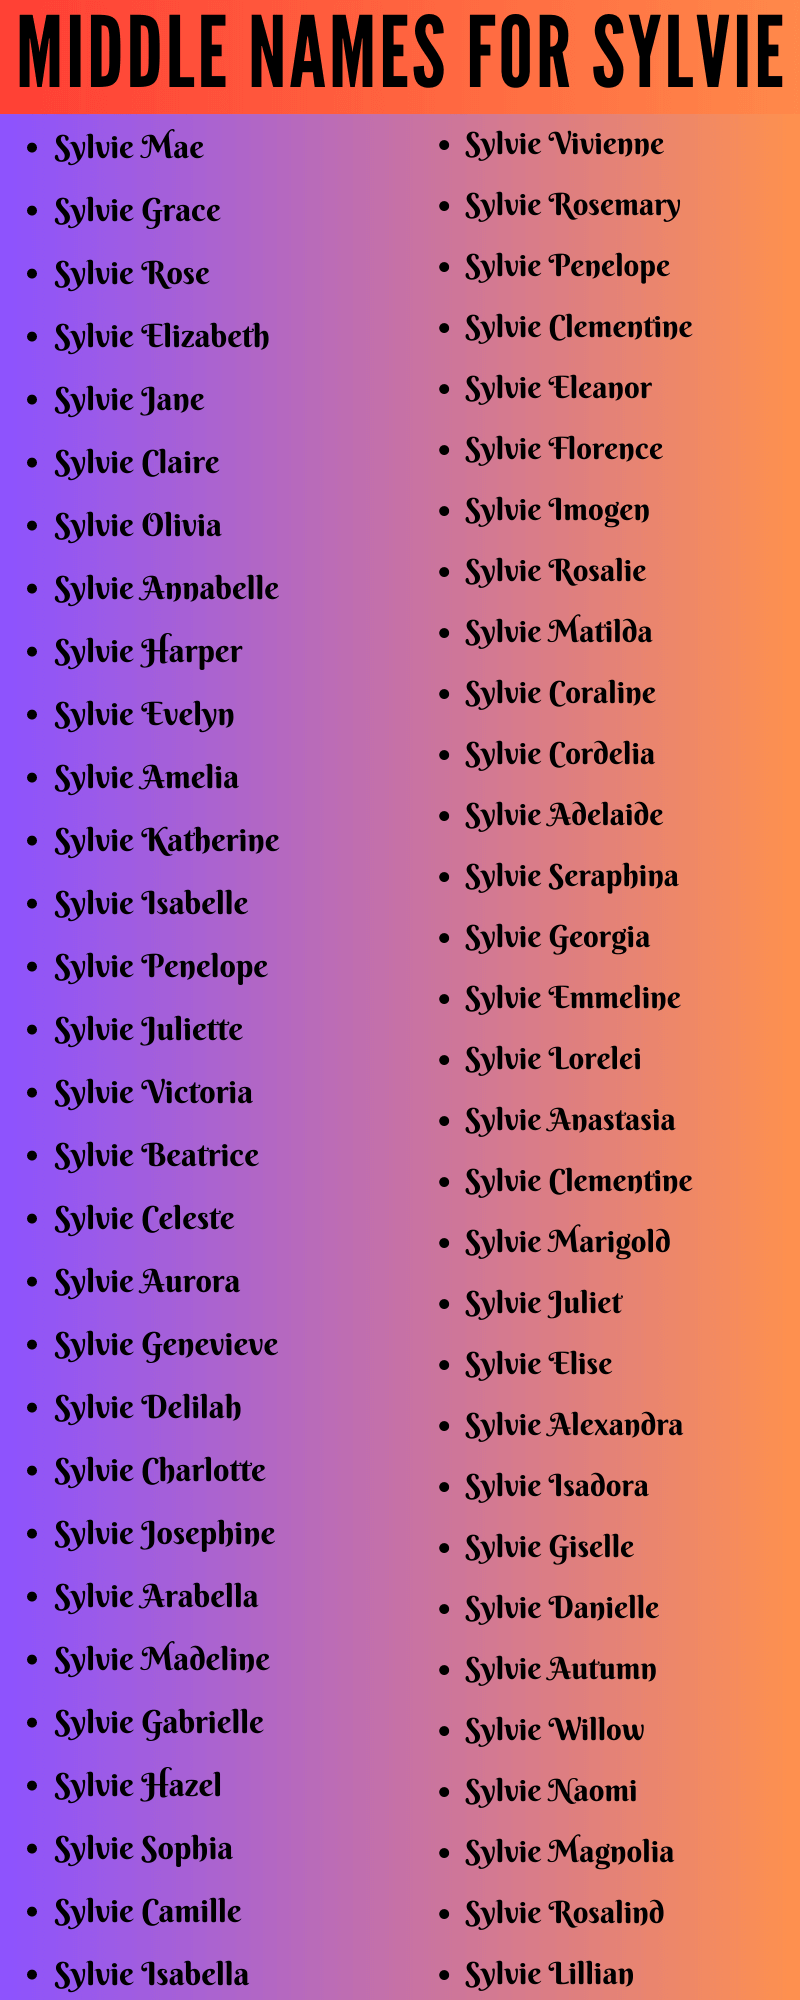  400 Amazing Middle Names For Sylvie